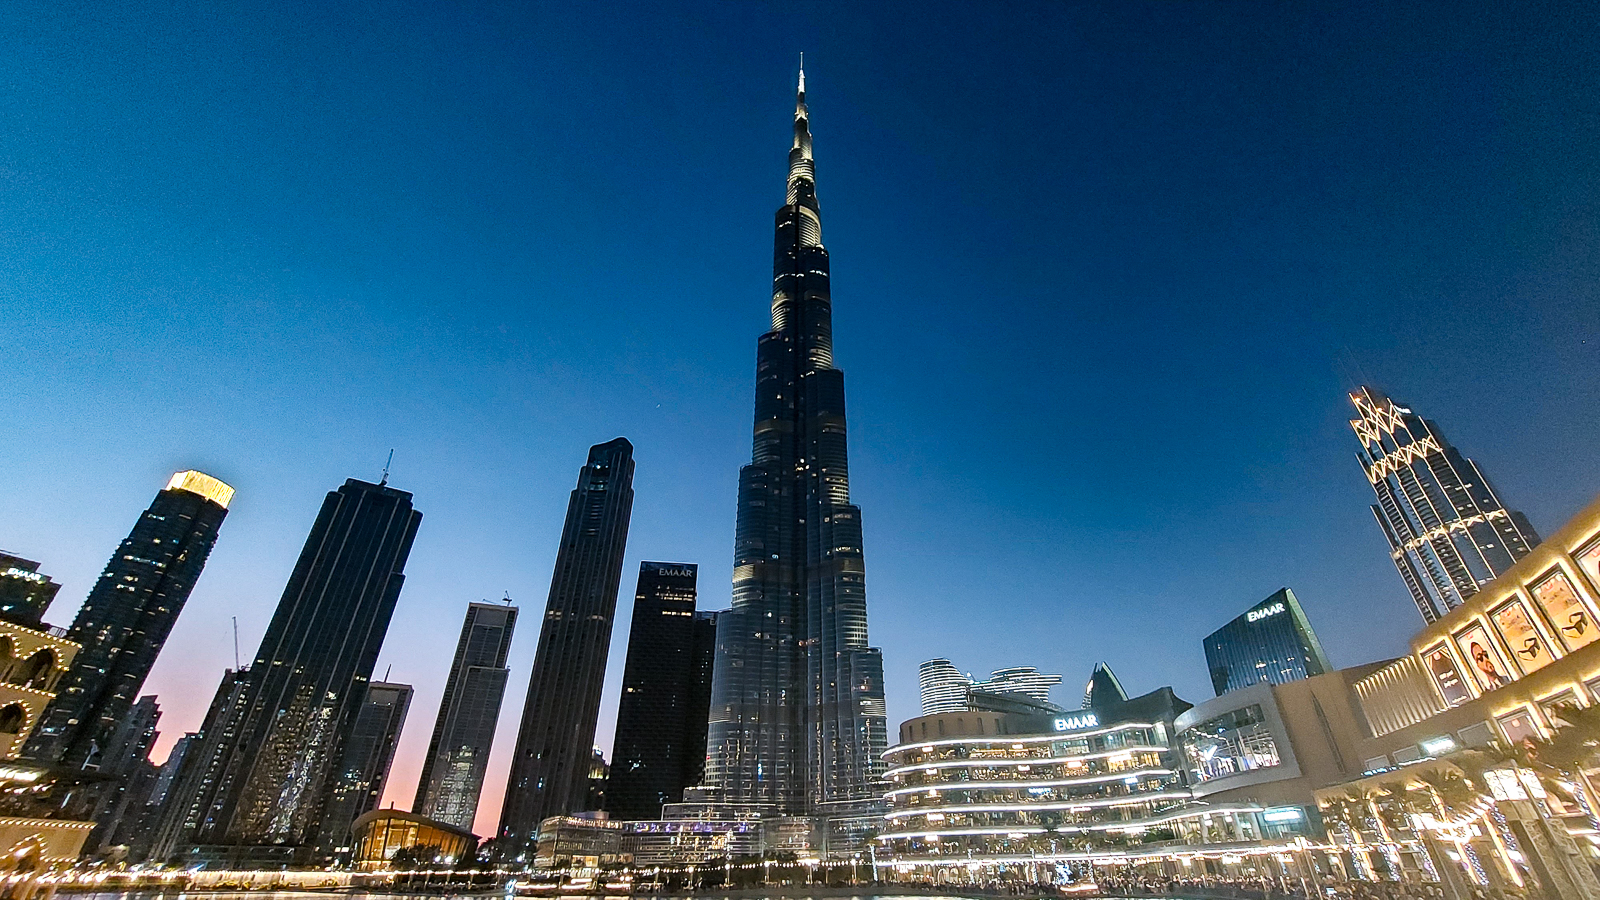 <span  class="uc_style_uc_tiles_grid_image_elementor_uc_items_attribute_title" style="color:#ffffff;">The number 1 sight in Dubai (in the Emirates): Burj Khalifa</span>